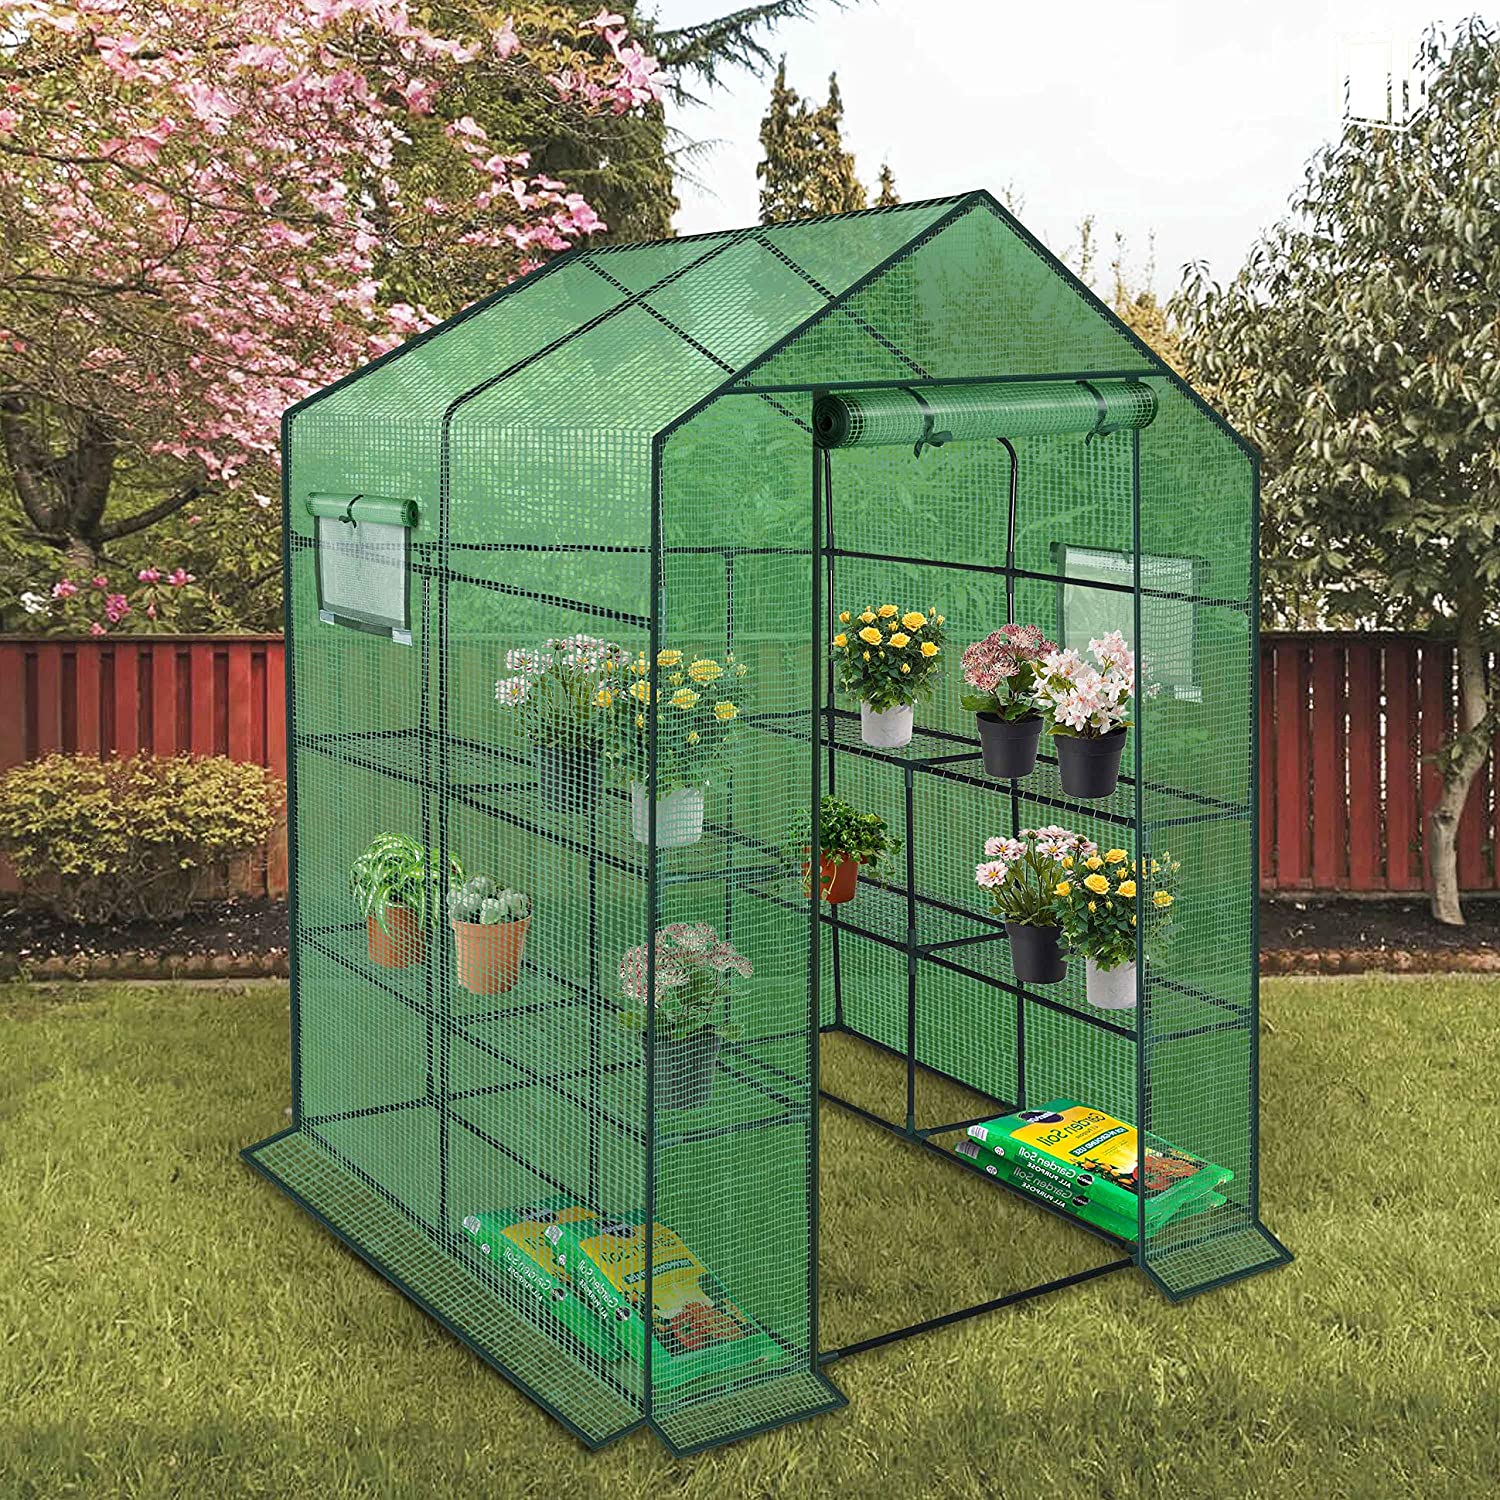 3 Tiers and 8 Shelves Walk-in Green House(L56.5 x W56.5 x H76.5